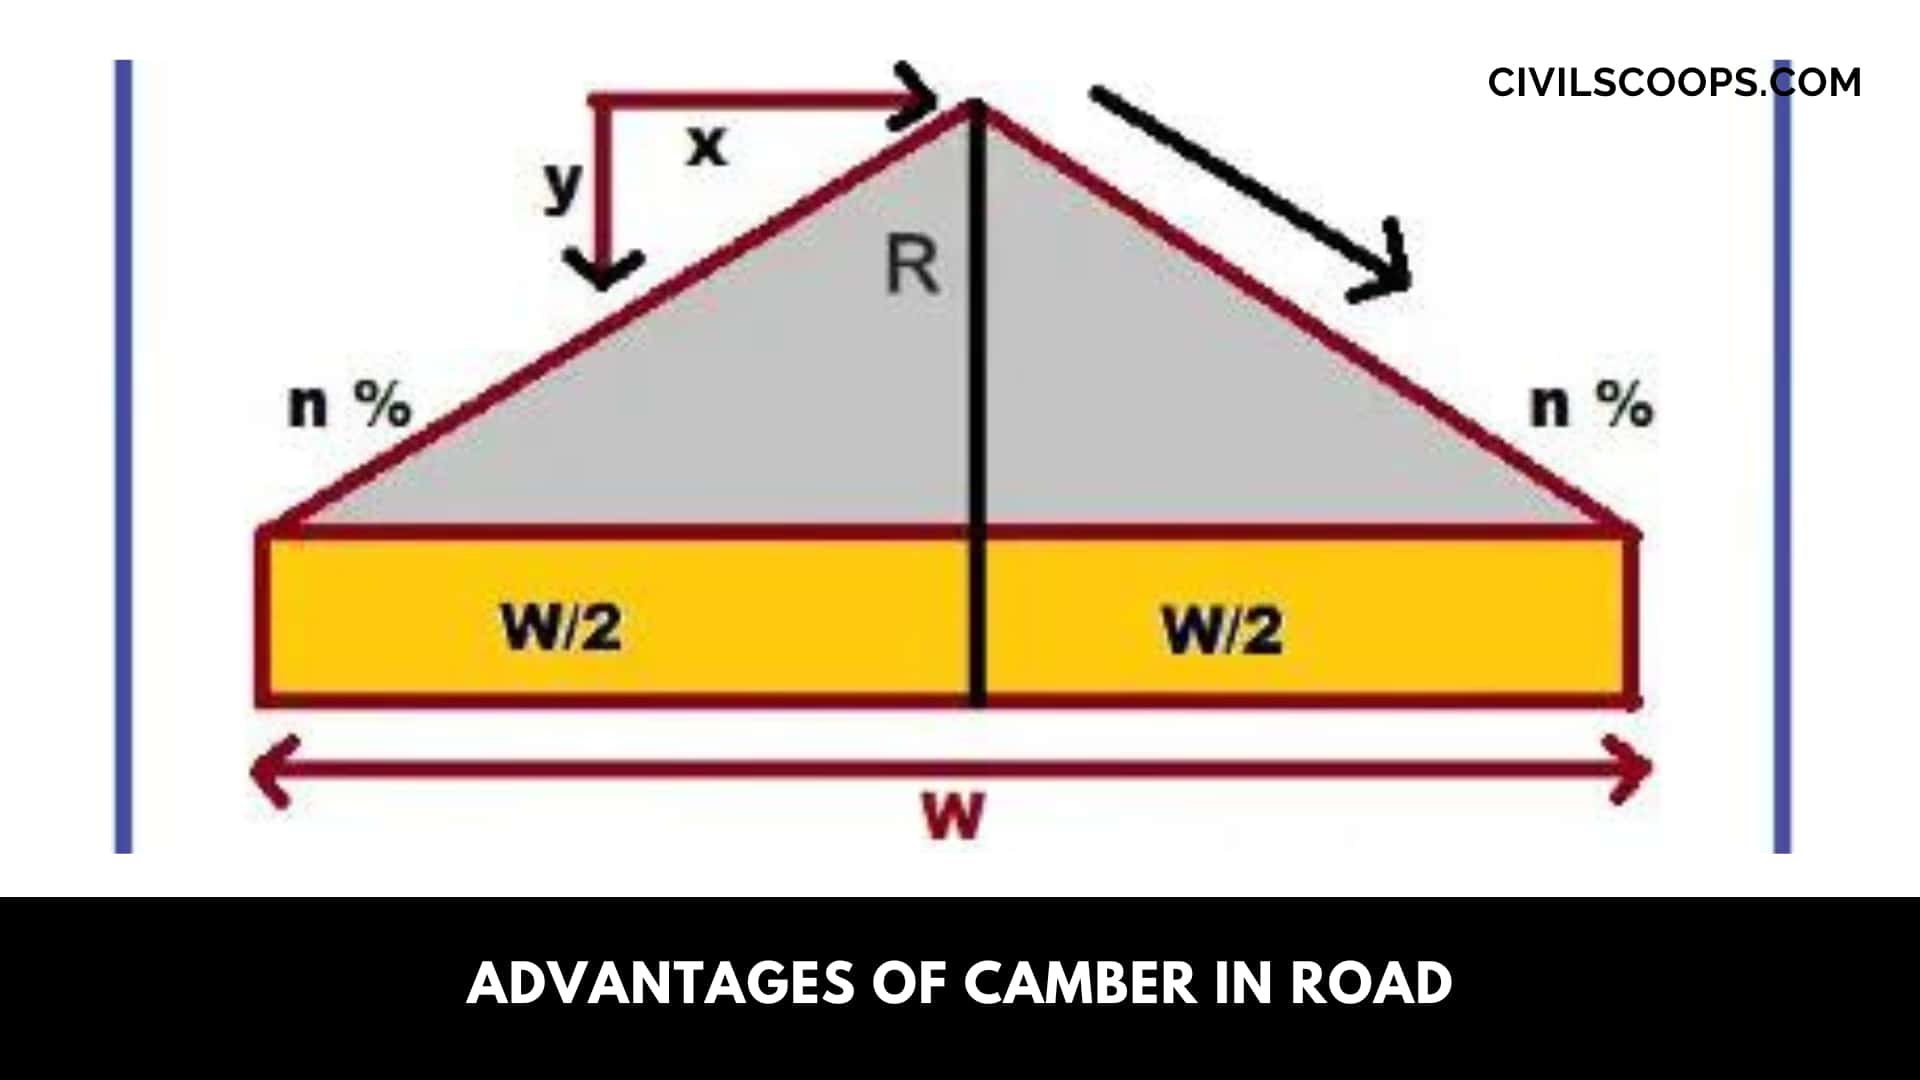 Advantages of Camber in Road